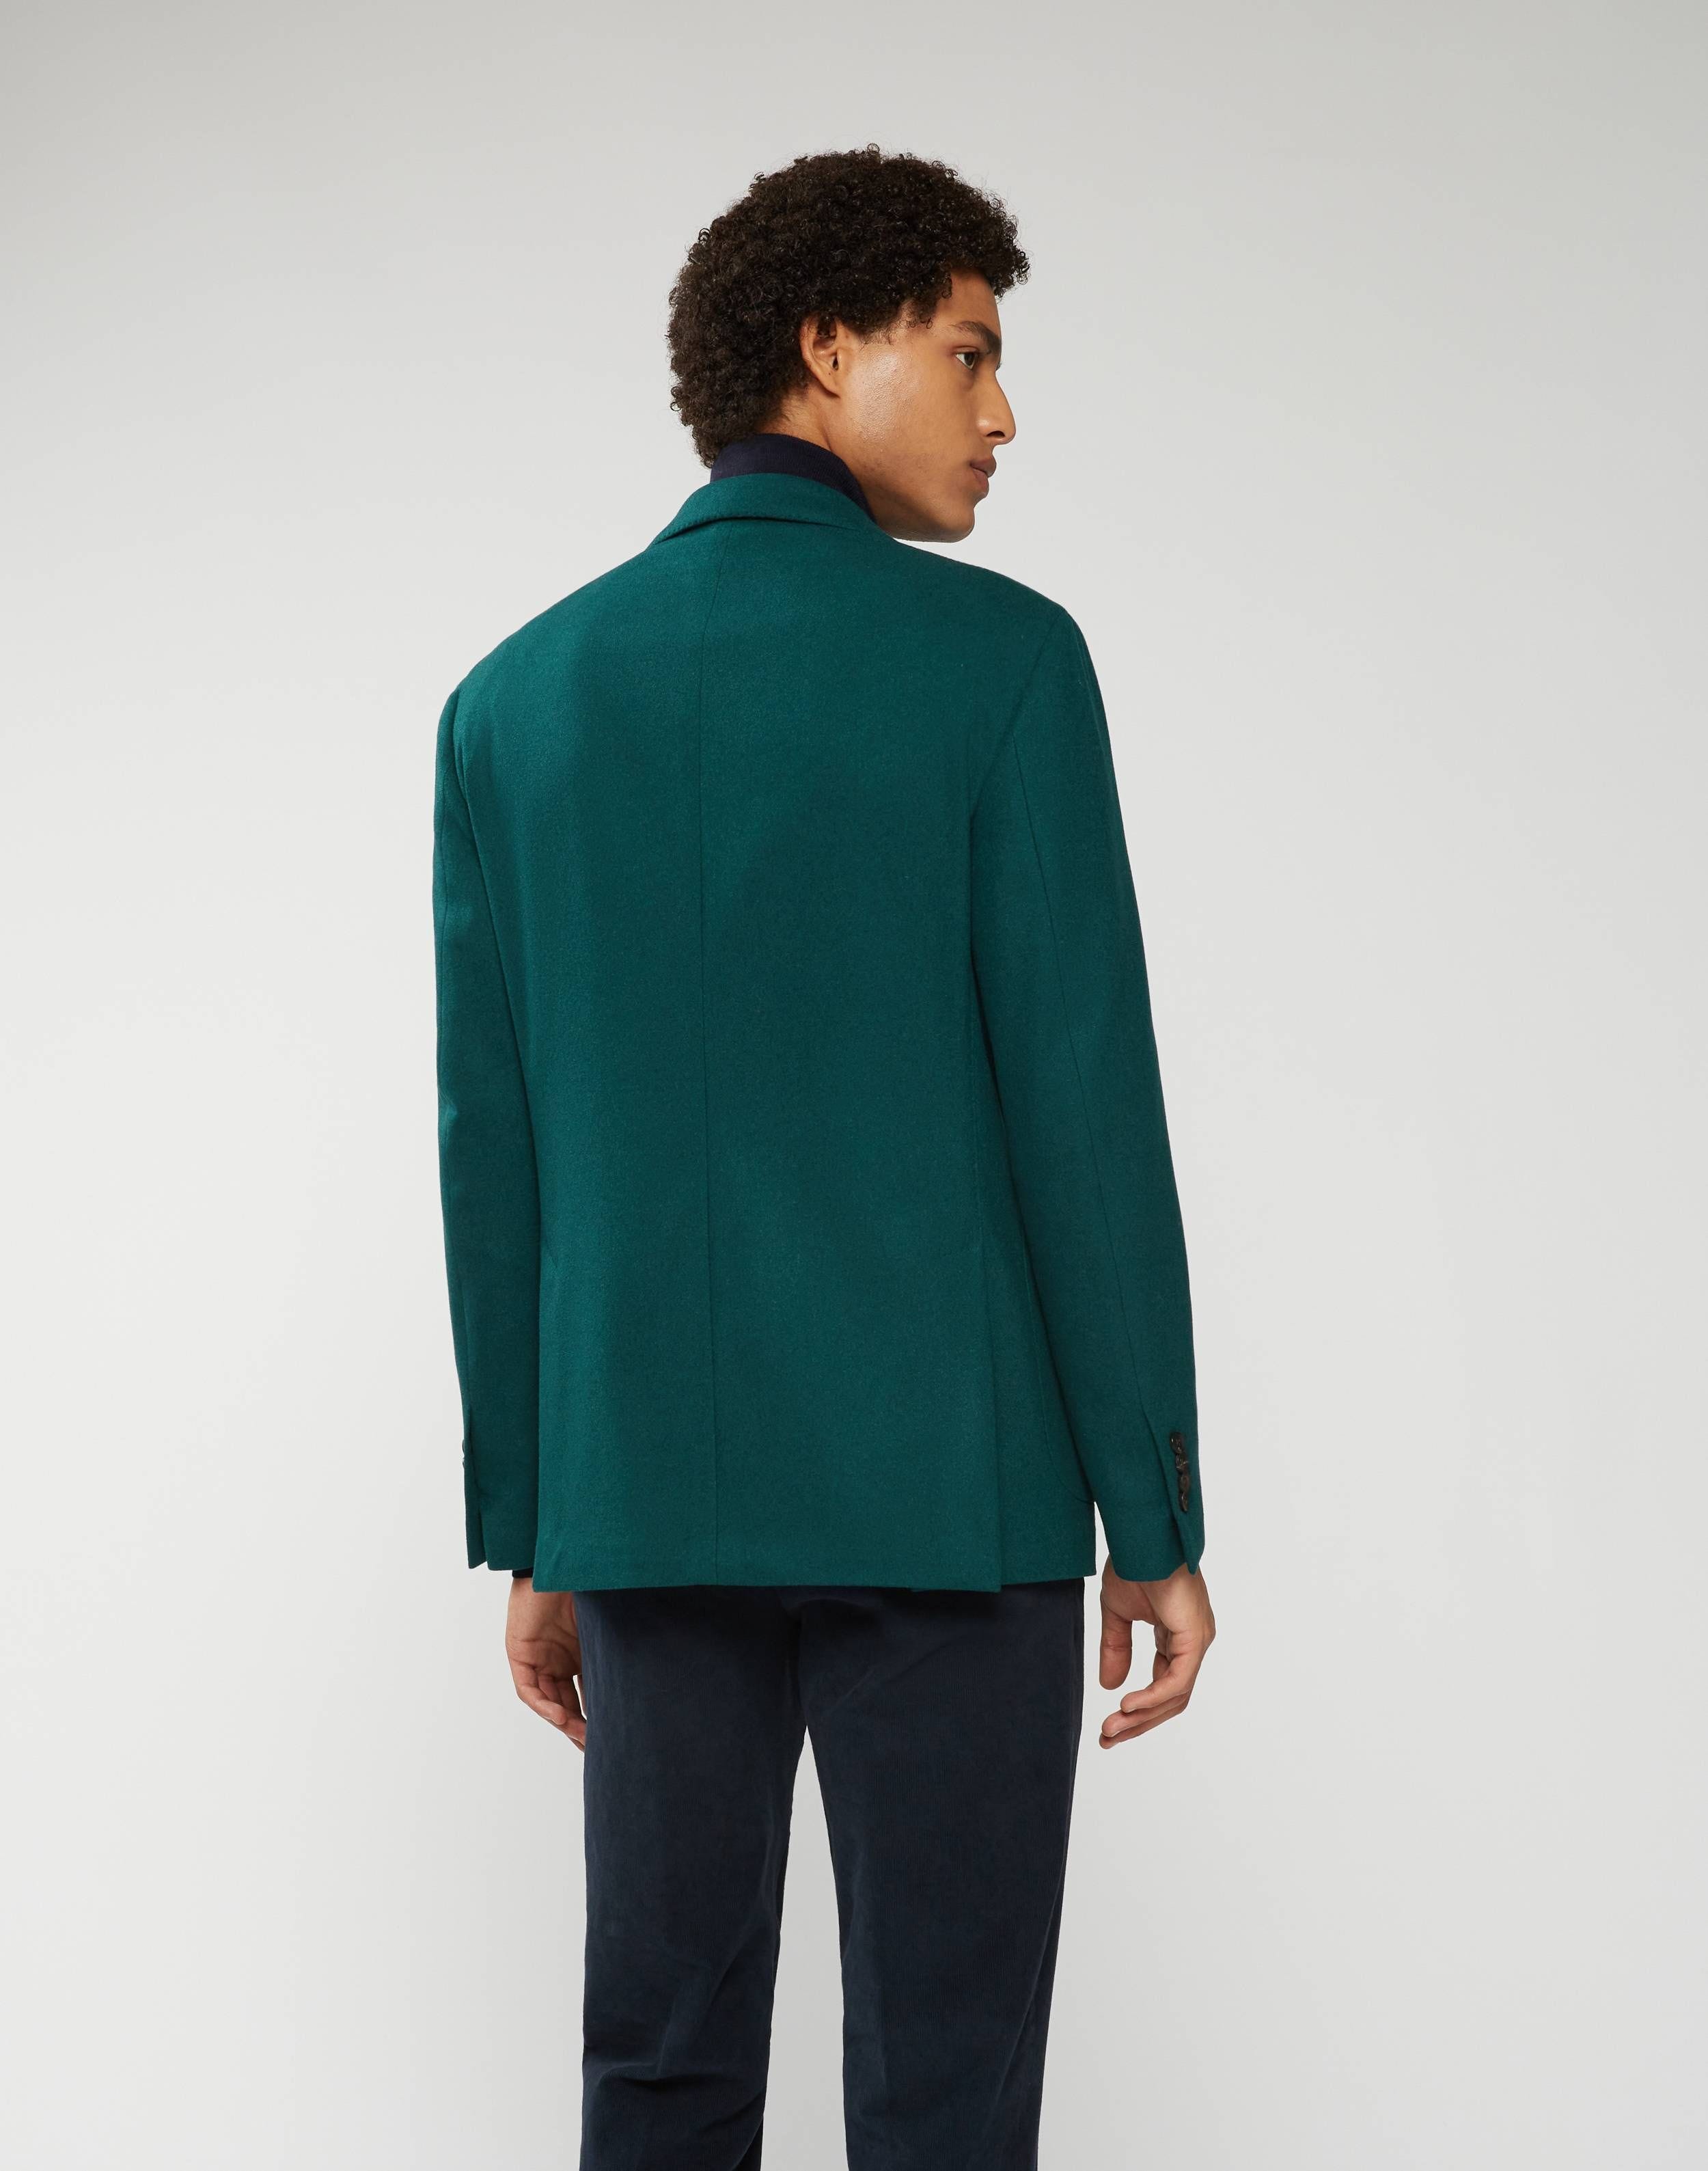 Jacket in recycled green cashmere - Special Line